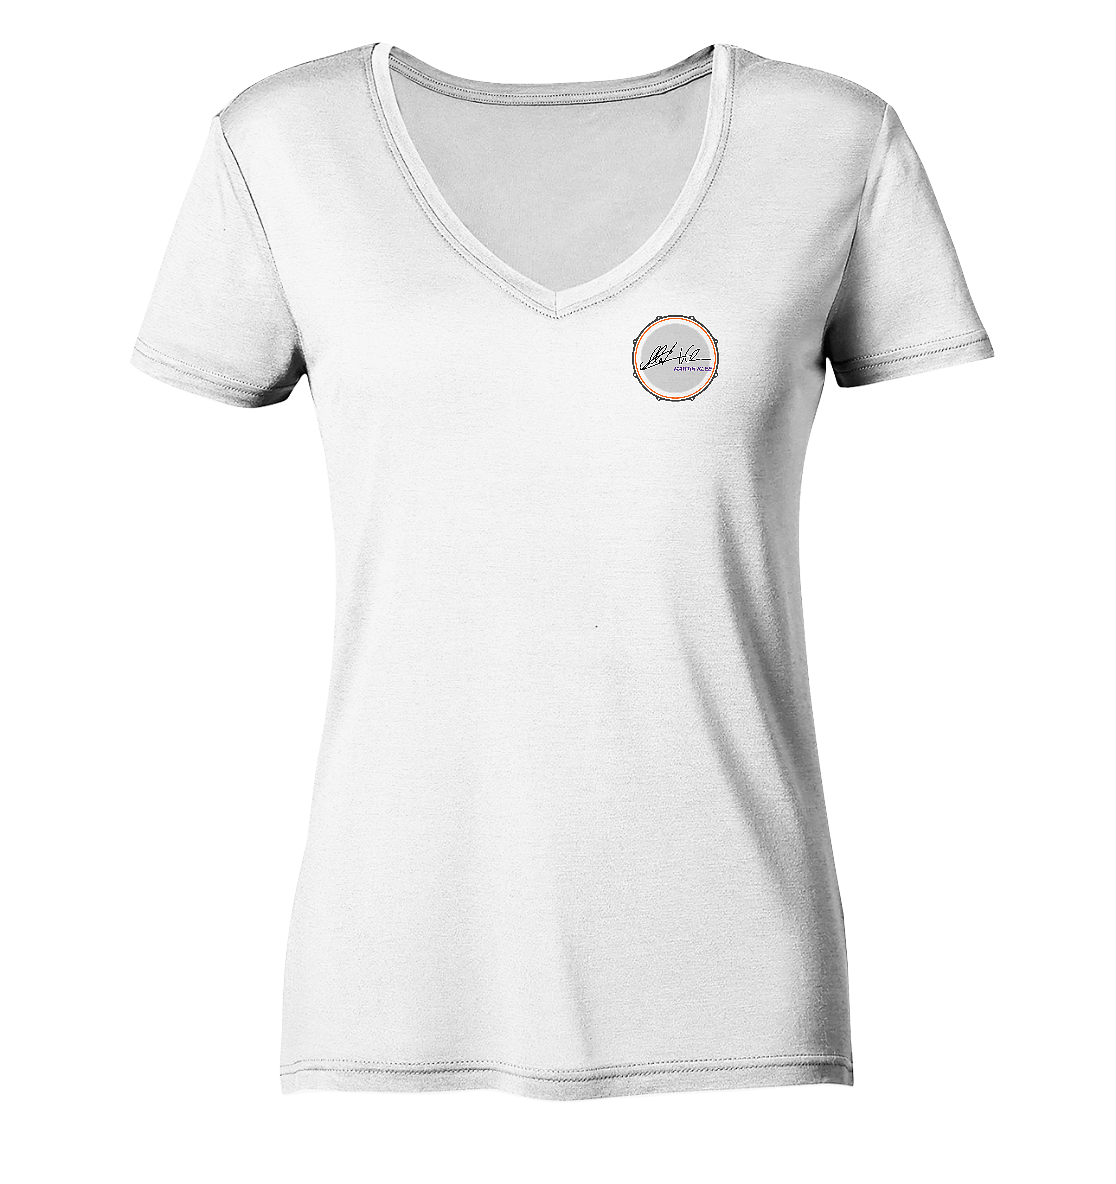 founder - ladies v-neck shirt | various colors